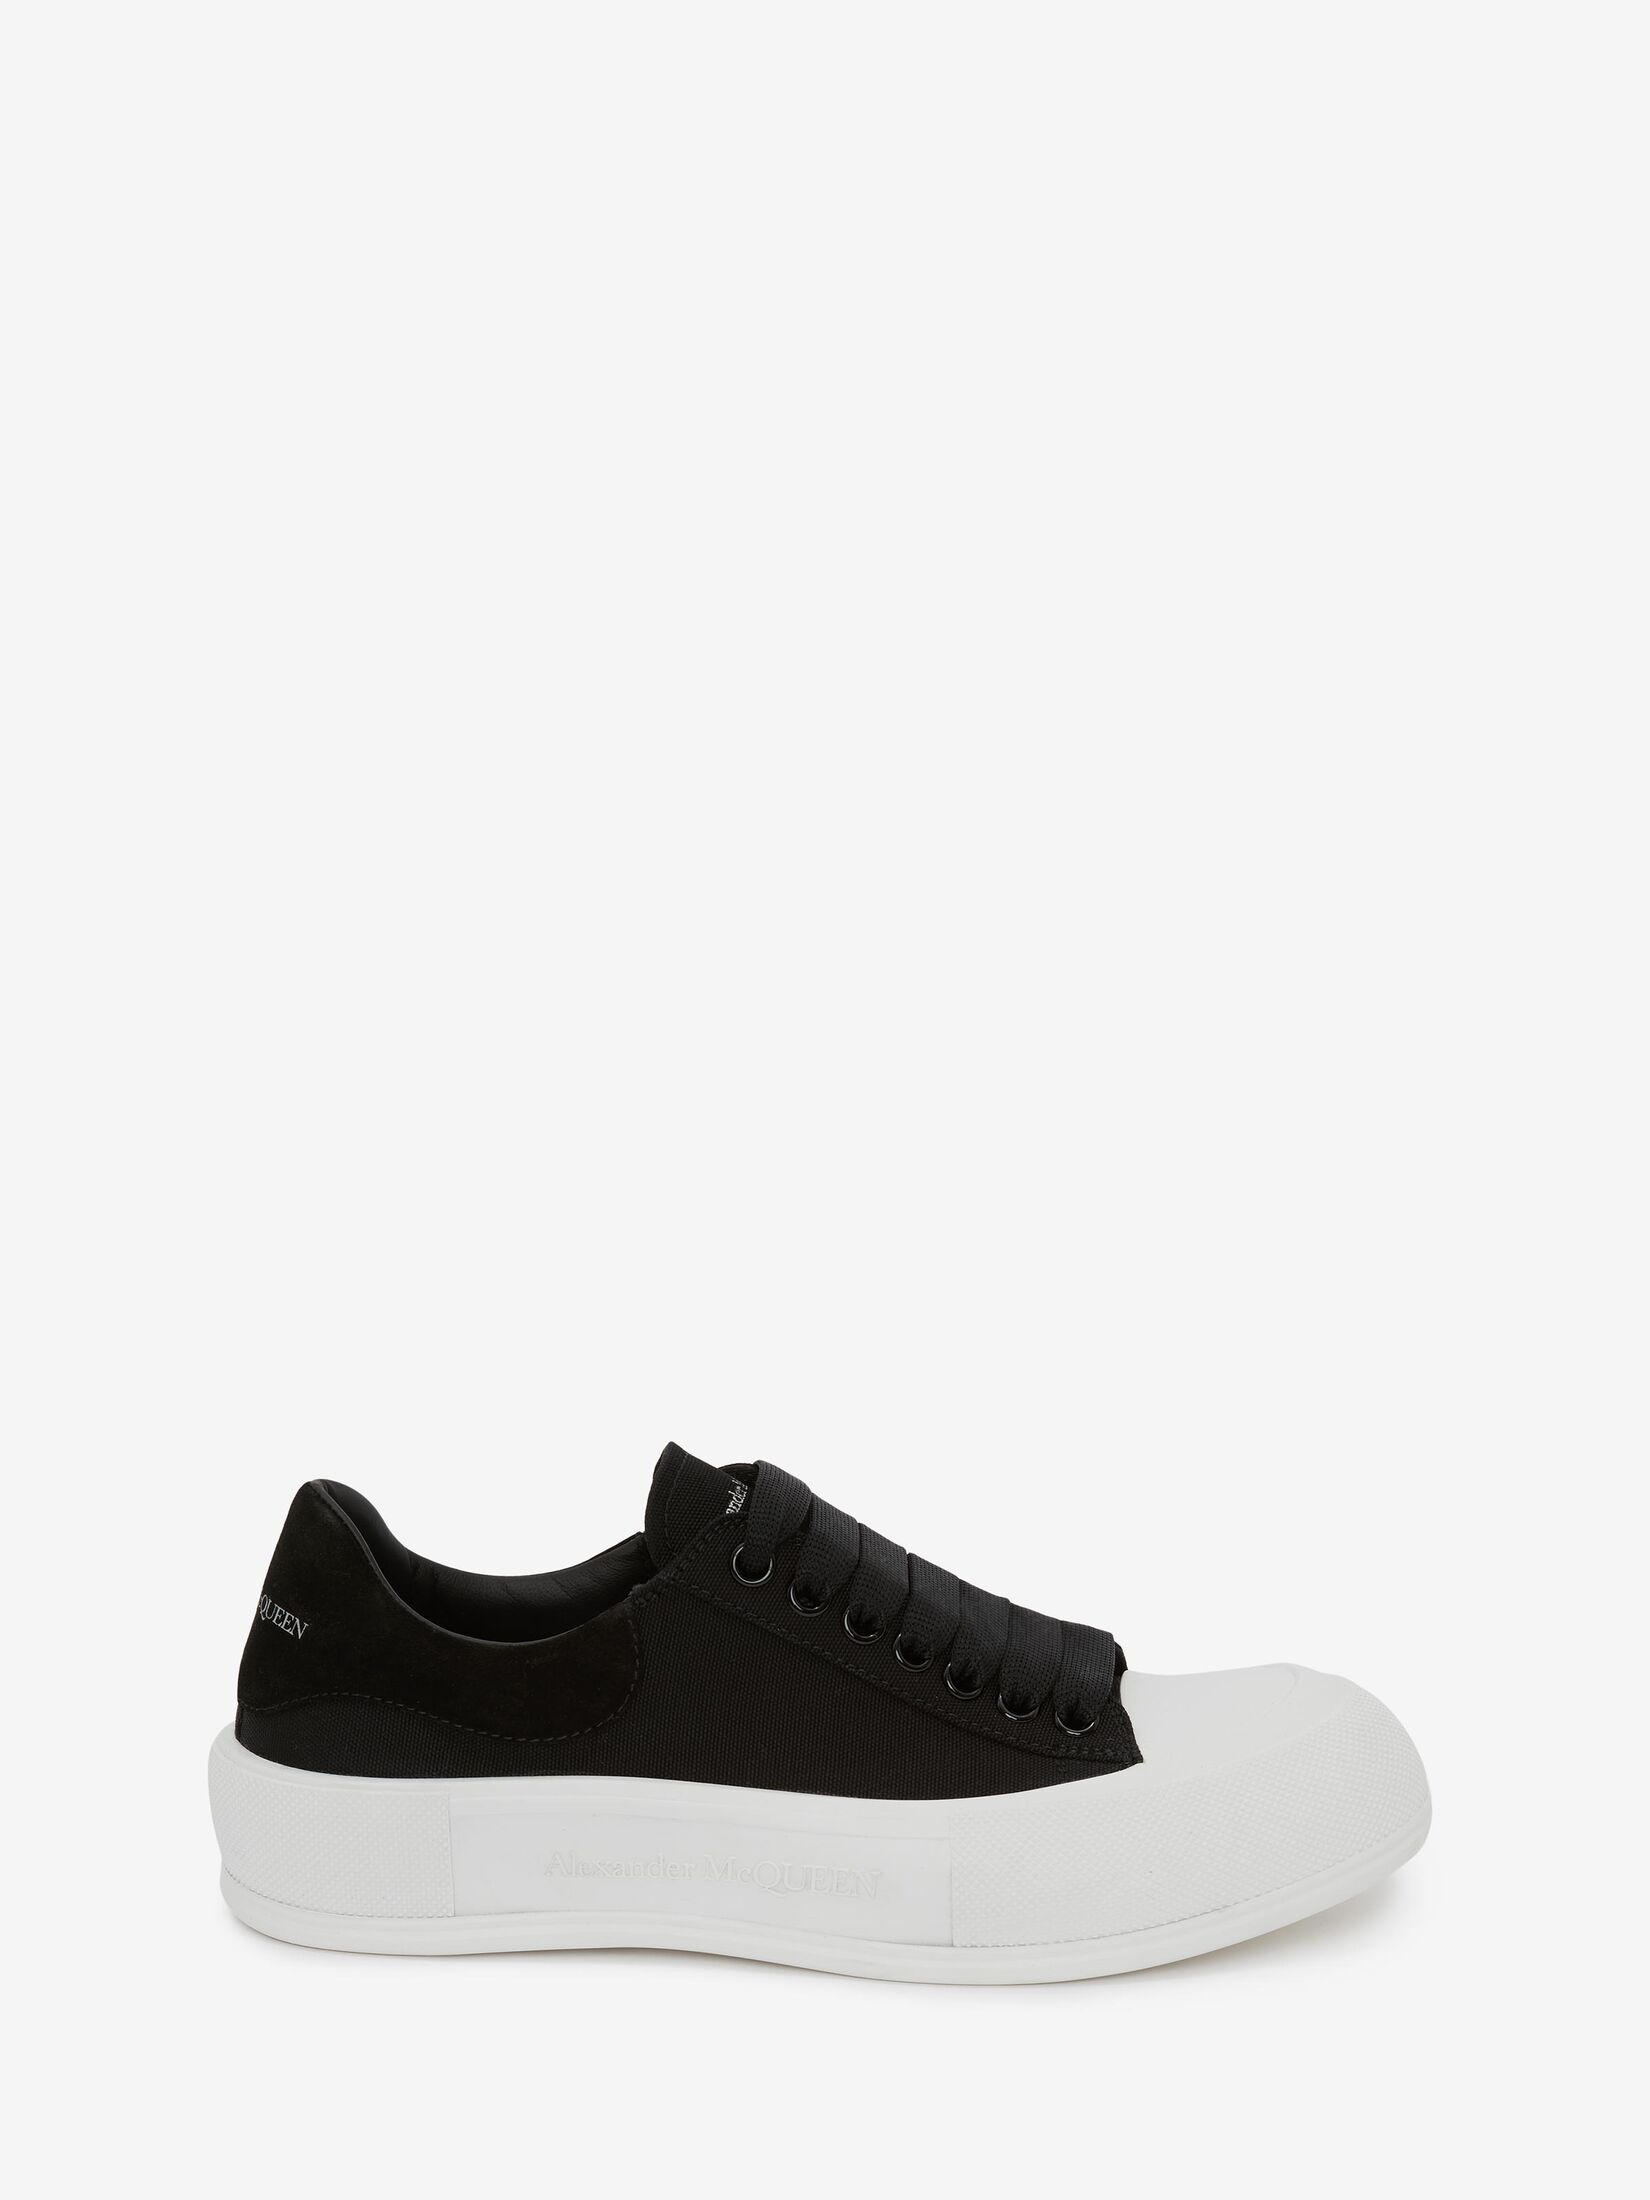 Deck Lace-Up Plimsoll in Black/White | Alexander McQueen CA